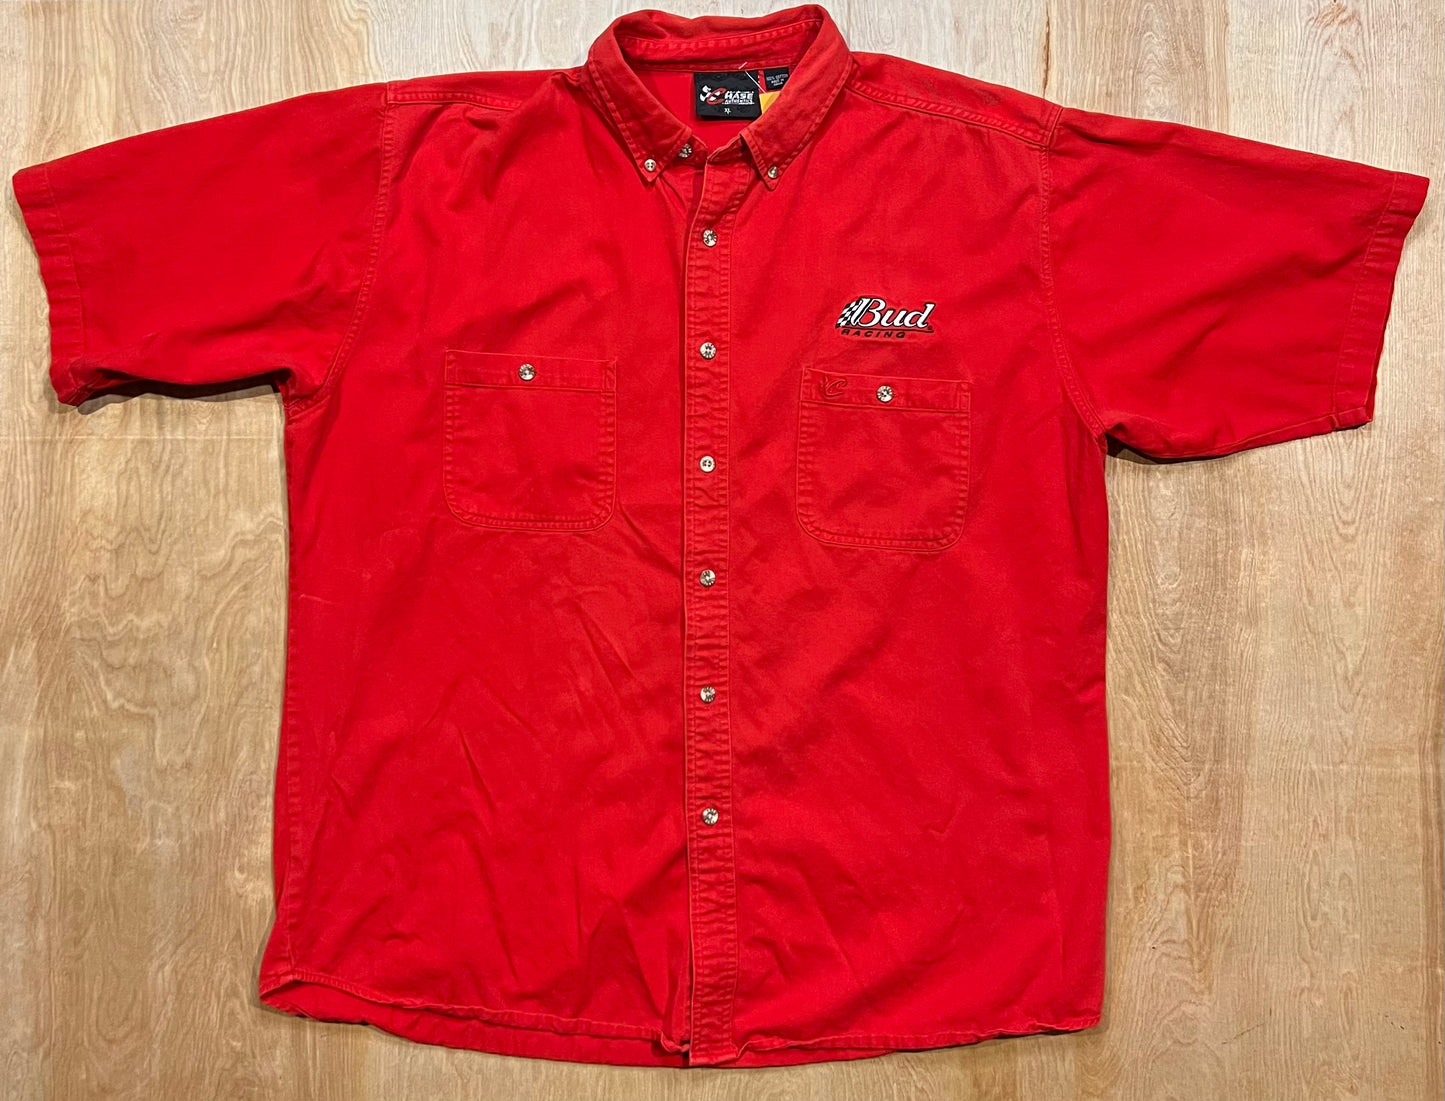 Vintage Bud Racing Short Sleeve Button Down